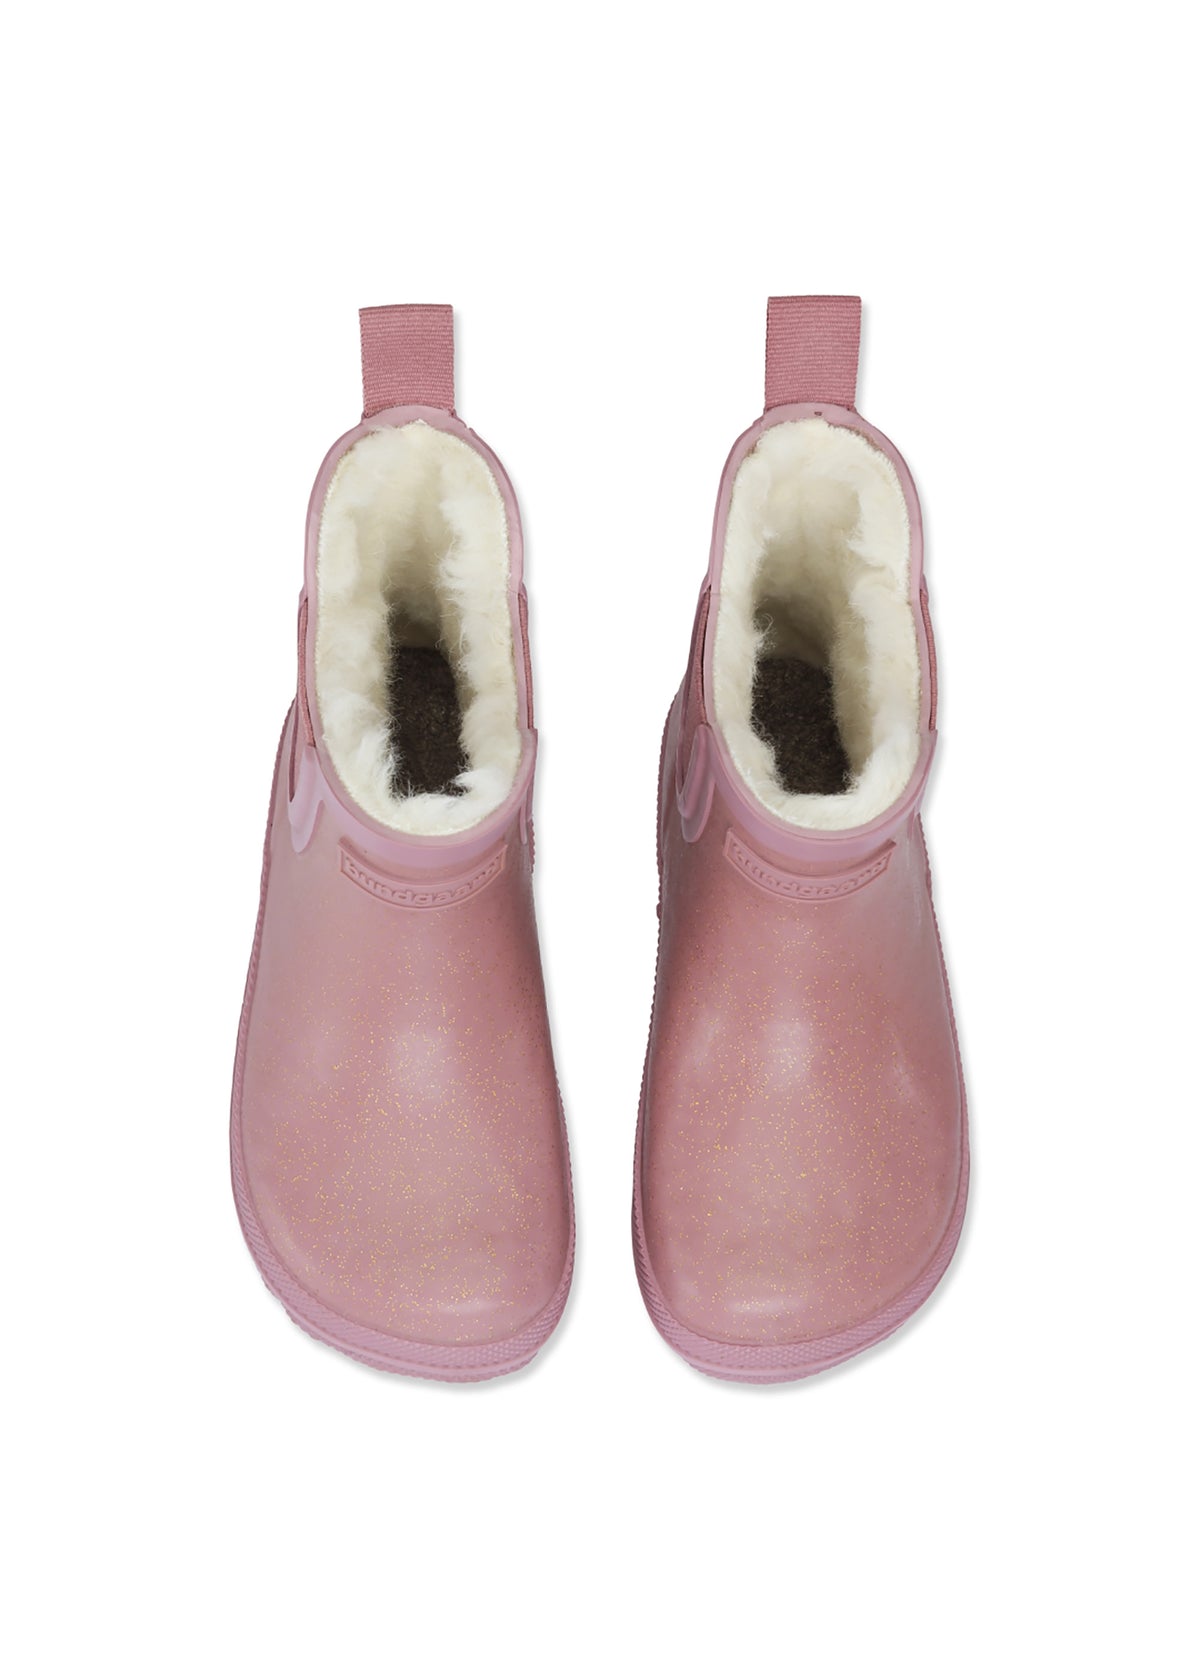 Rubber boots with a warm lining - light pink, short shaft, Charly Low Warm